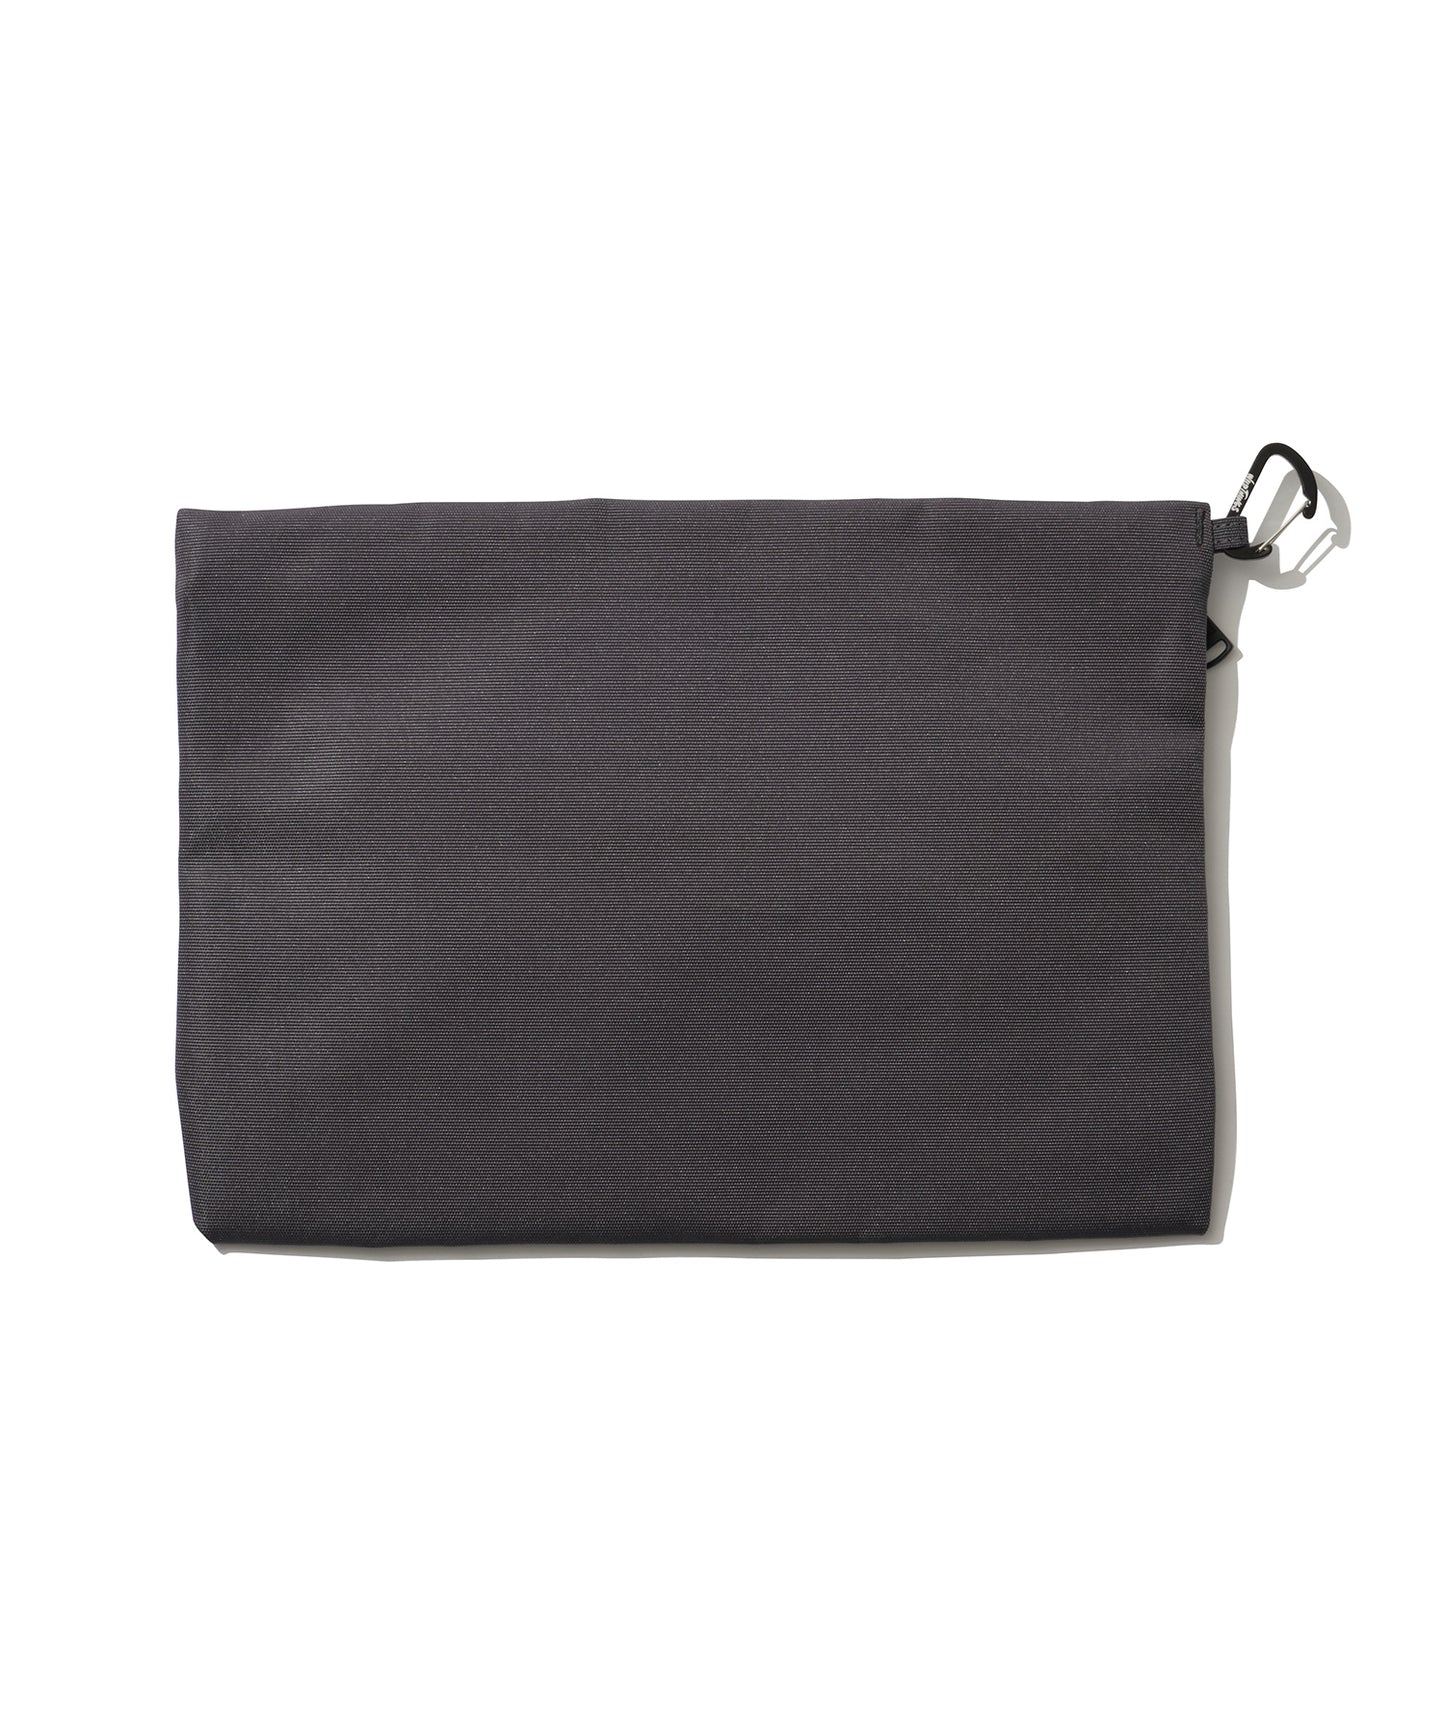 [WILD THINGS ワイルドシングス] THE PX MULTI POUCH A4｜マルチポーチ(A4)＜F.GREY＞